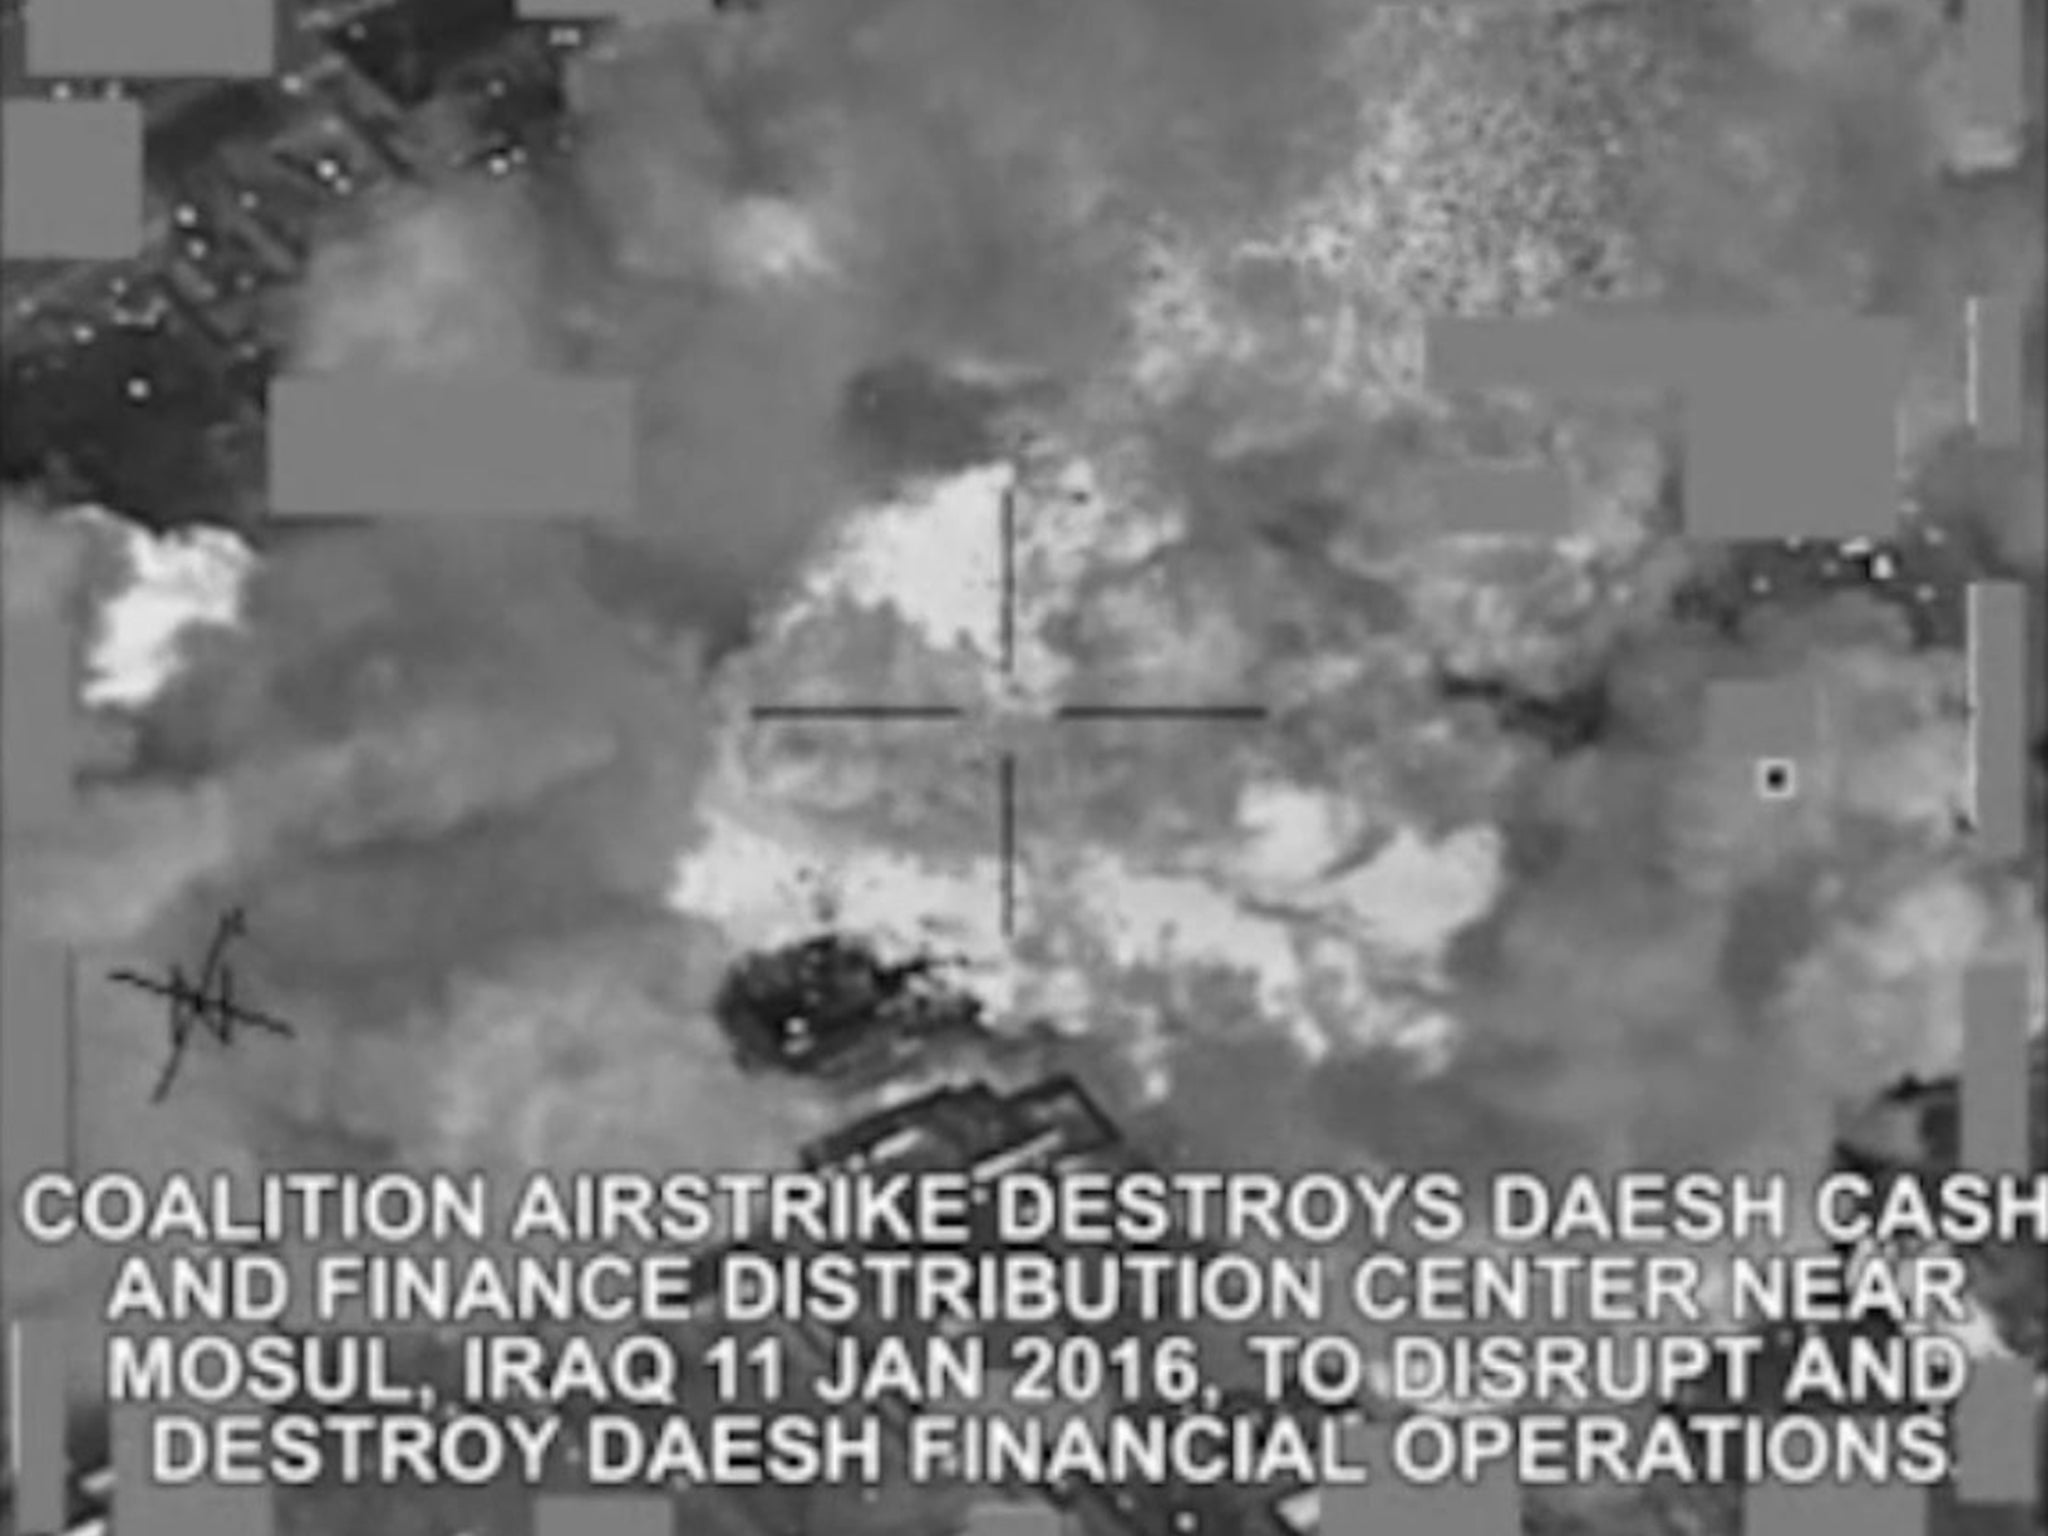 Footage from the coalition airstrike near Mosul on 11 January 2016